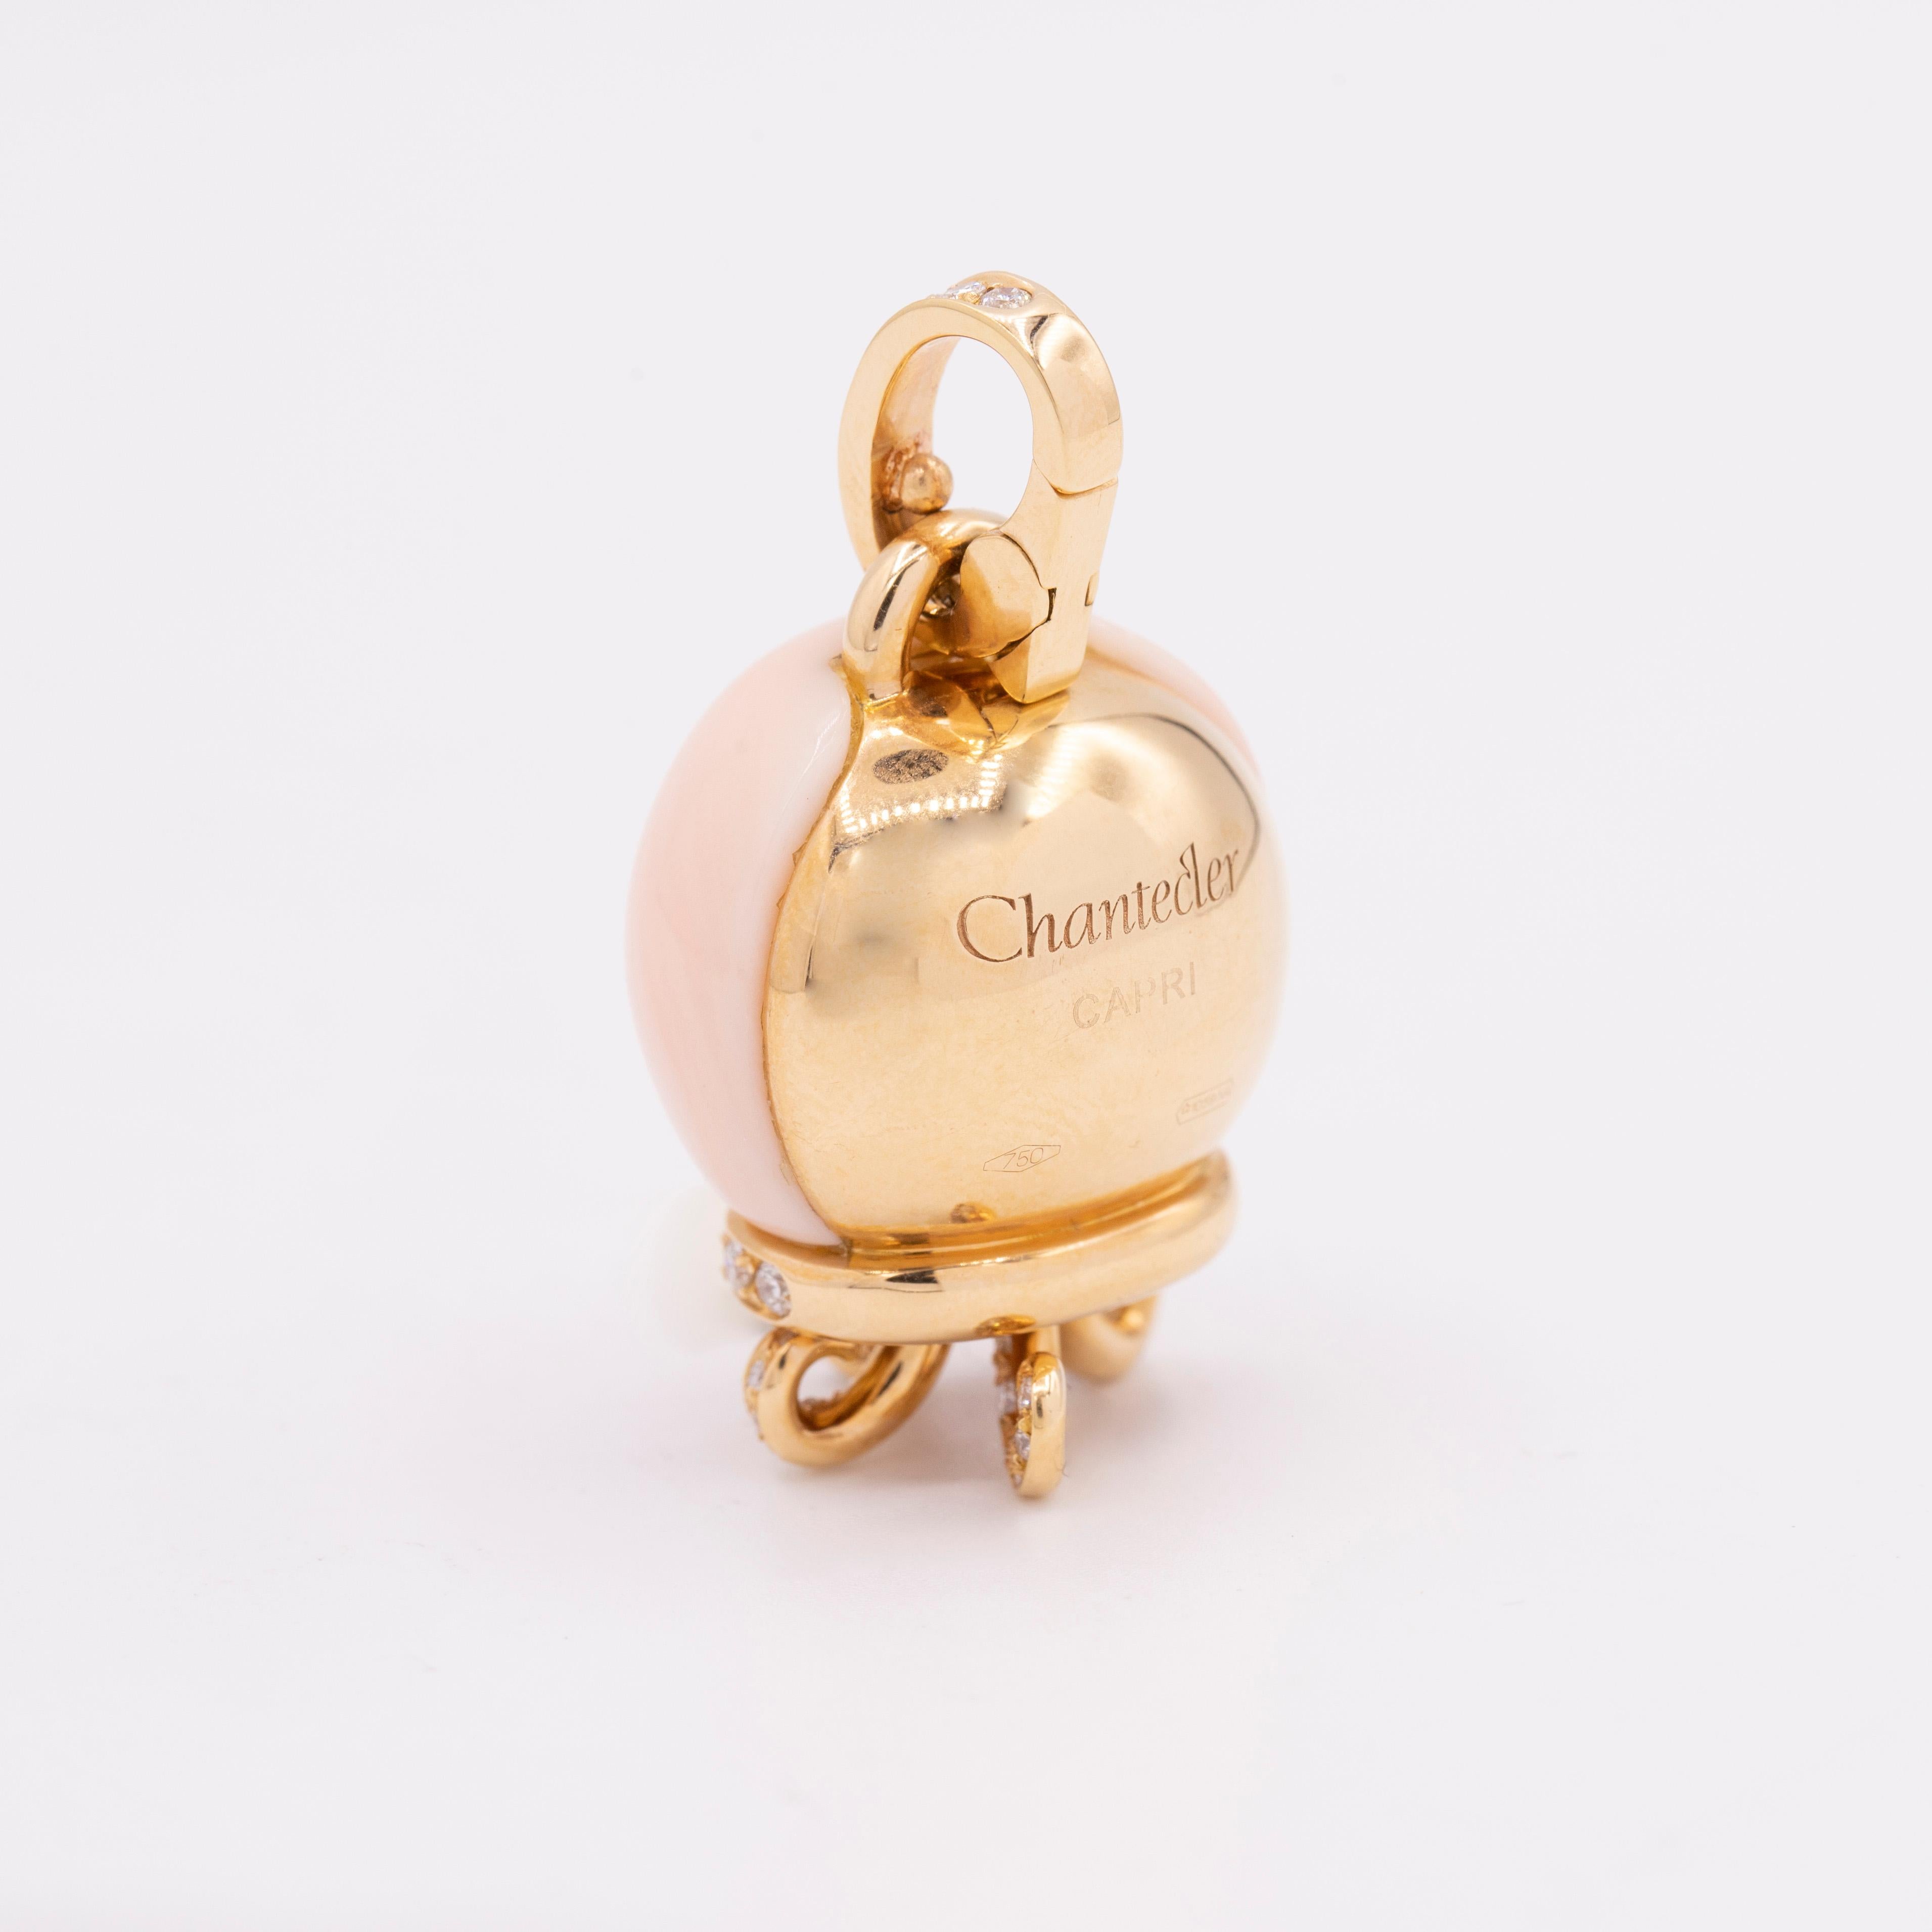  Exclusively at Hamilton Jewelers in the US, Chantecler jewelry is inspired by the Island of Capri's exotic natural environment. Marinelle Octopus charm set in 18k pink gold, pink coral and .82cts. of diamonds.